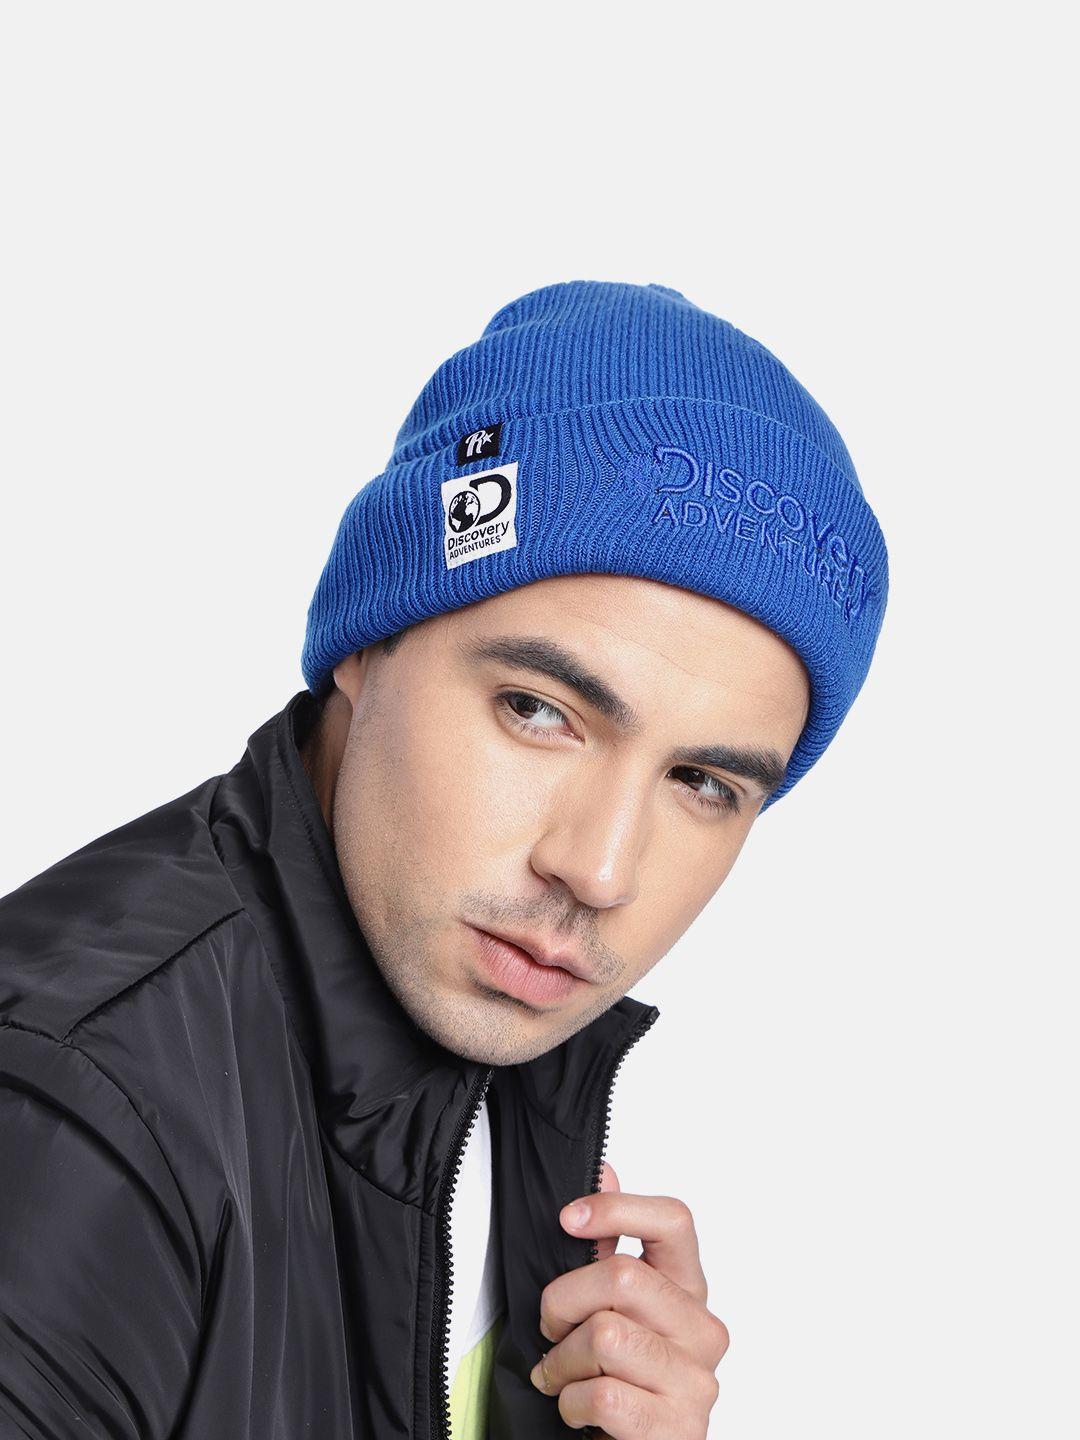 roadster x discovery adventures unisex blue discovery acrylic beanie